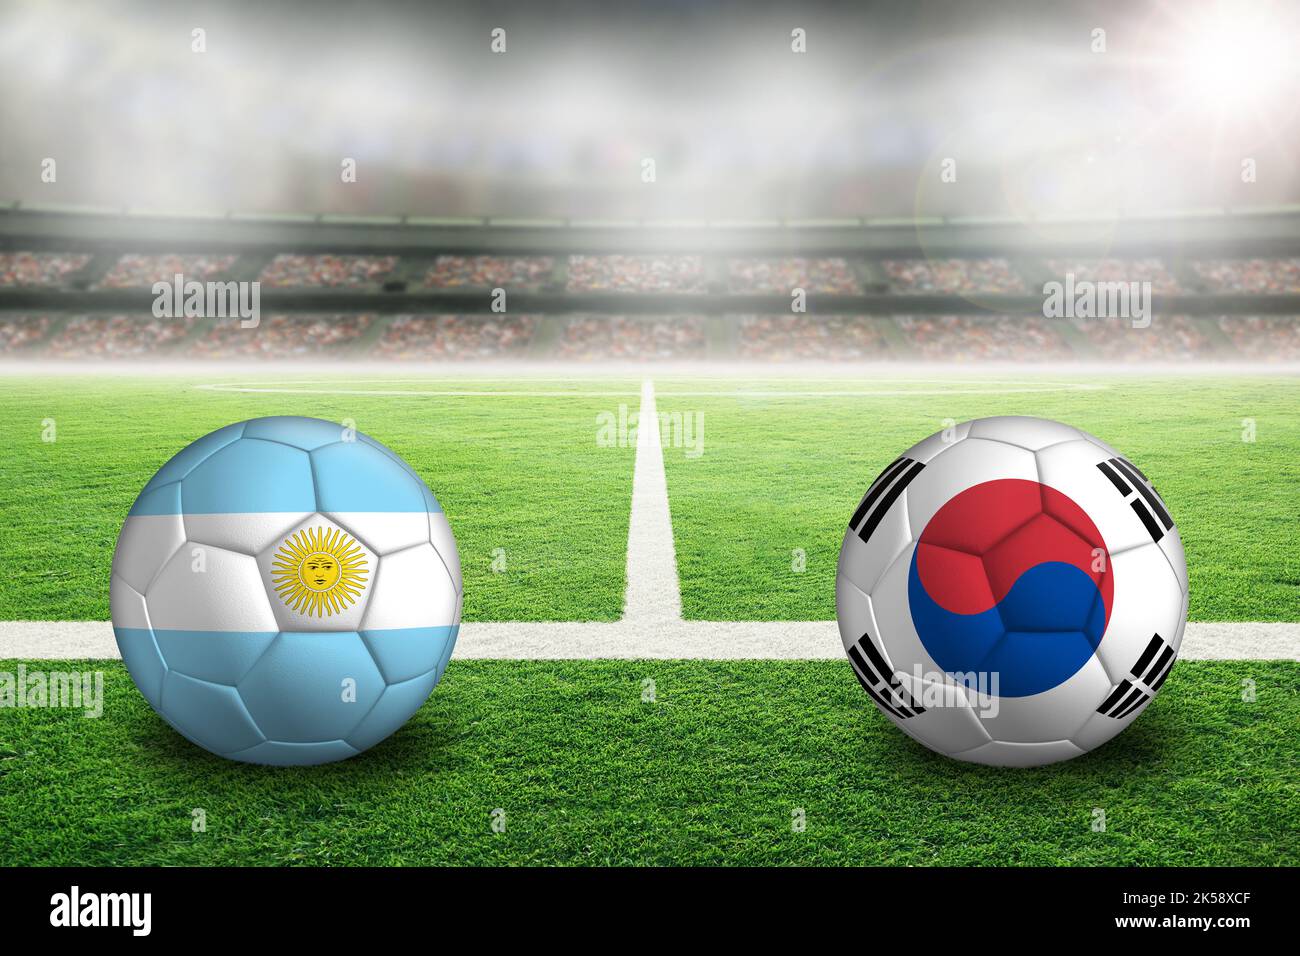 Uruguay vs Korea Republic football in brightly lit outdoor stadium with painted South Korean and Uruguayan flags. Focus on foreground and soccer ball Stock Photo